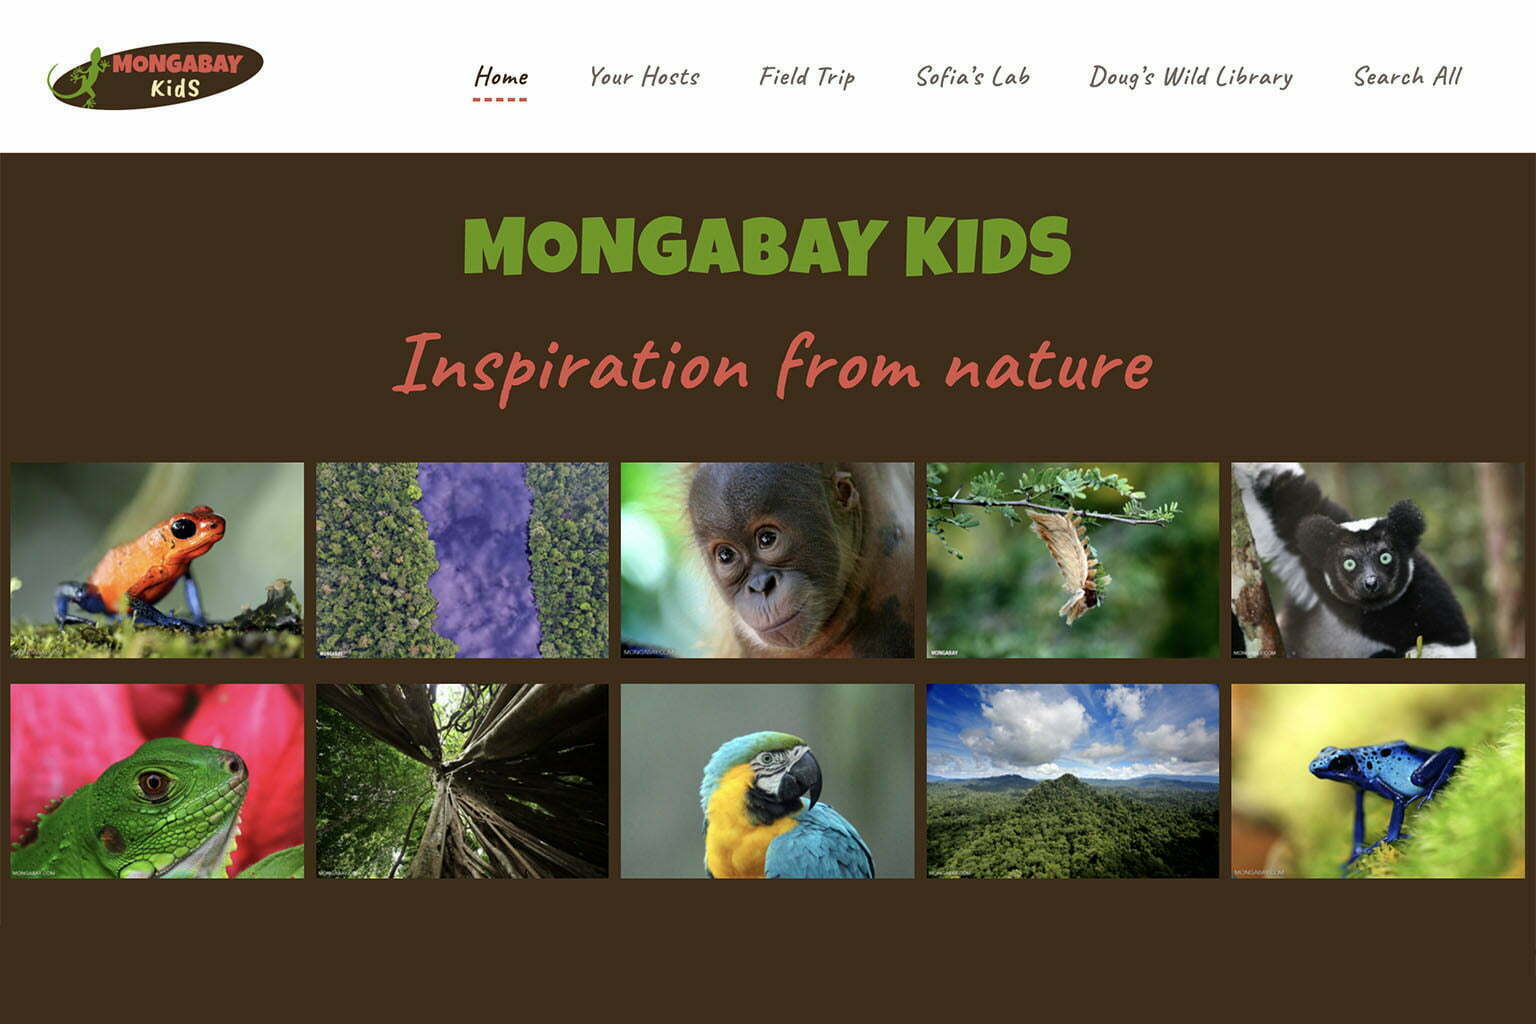 A new environmental education site for kids